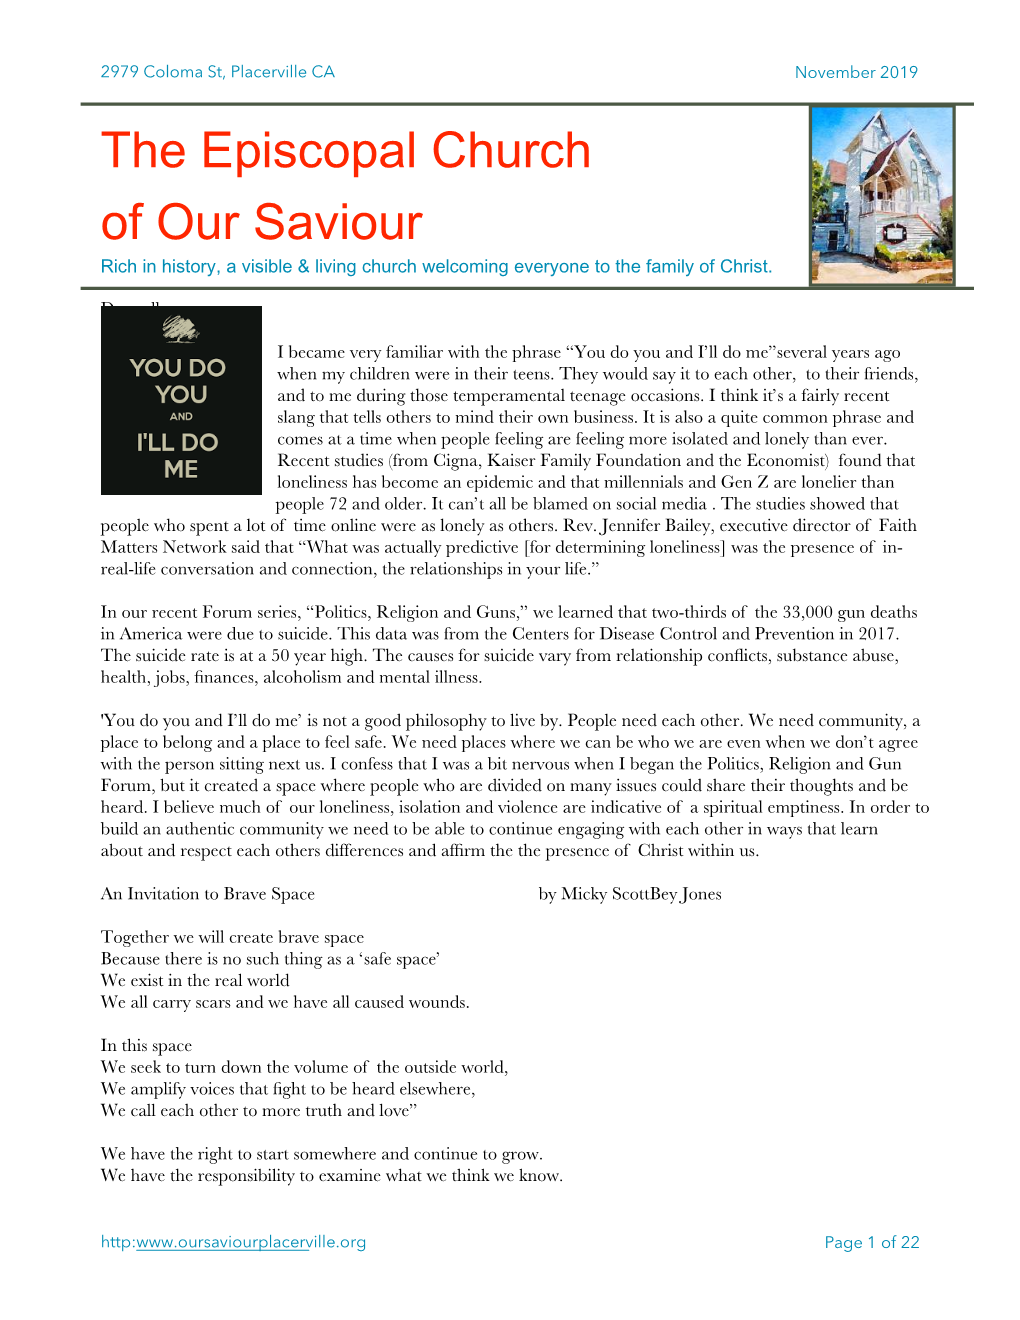 The Episcopal Church of Our Saviour Rich in History, a Visible & Living Church Welcoming Everyone to the Family of Christ